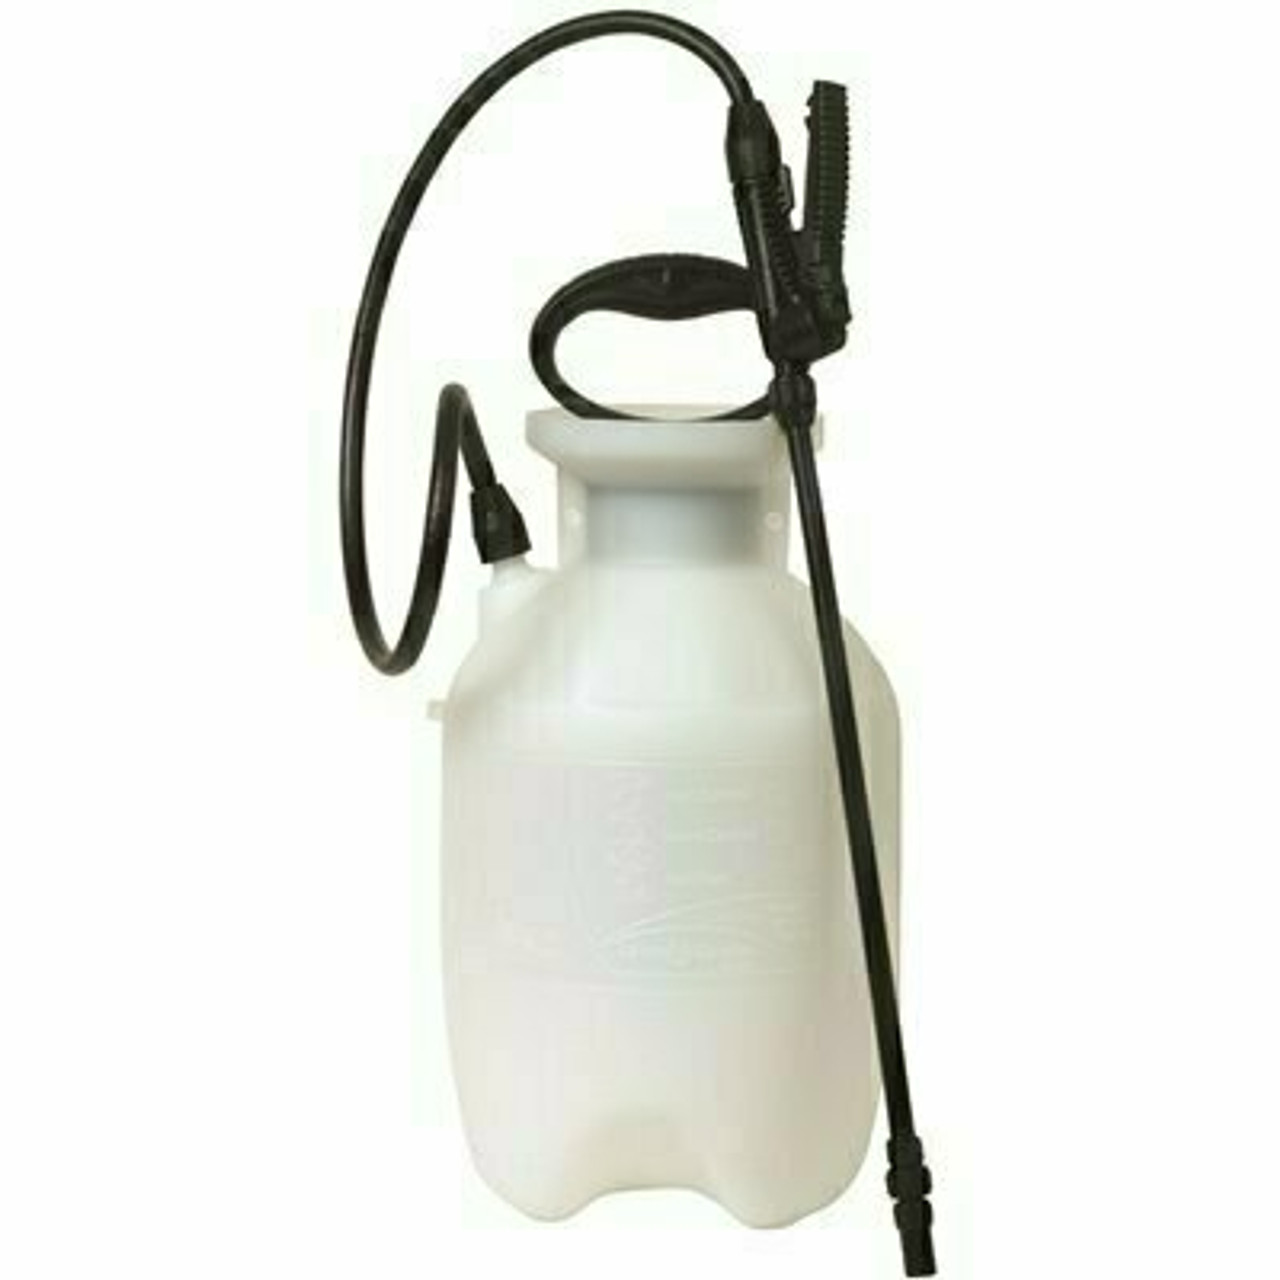 Chapin 1 Gal. Lawn And Garden And Home Project Sprayer